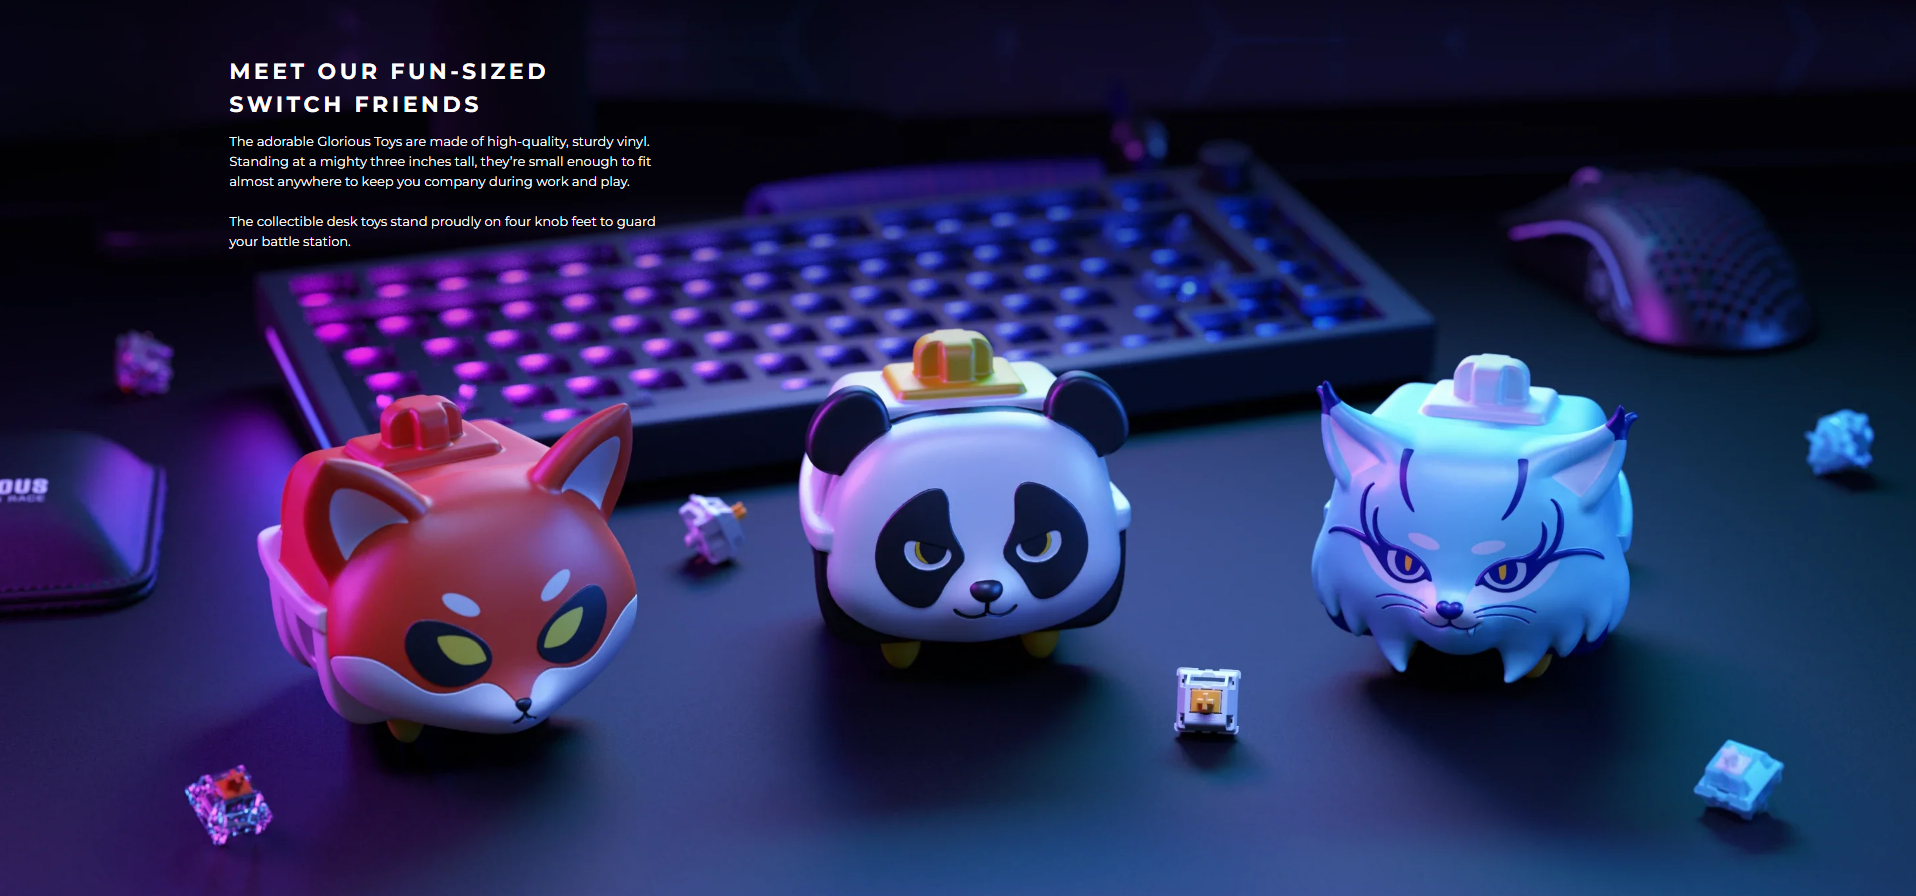 A large marketing image providing additional information about the product Glorious Switch Vinyl Toy - Panda - Additional alt info not provided